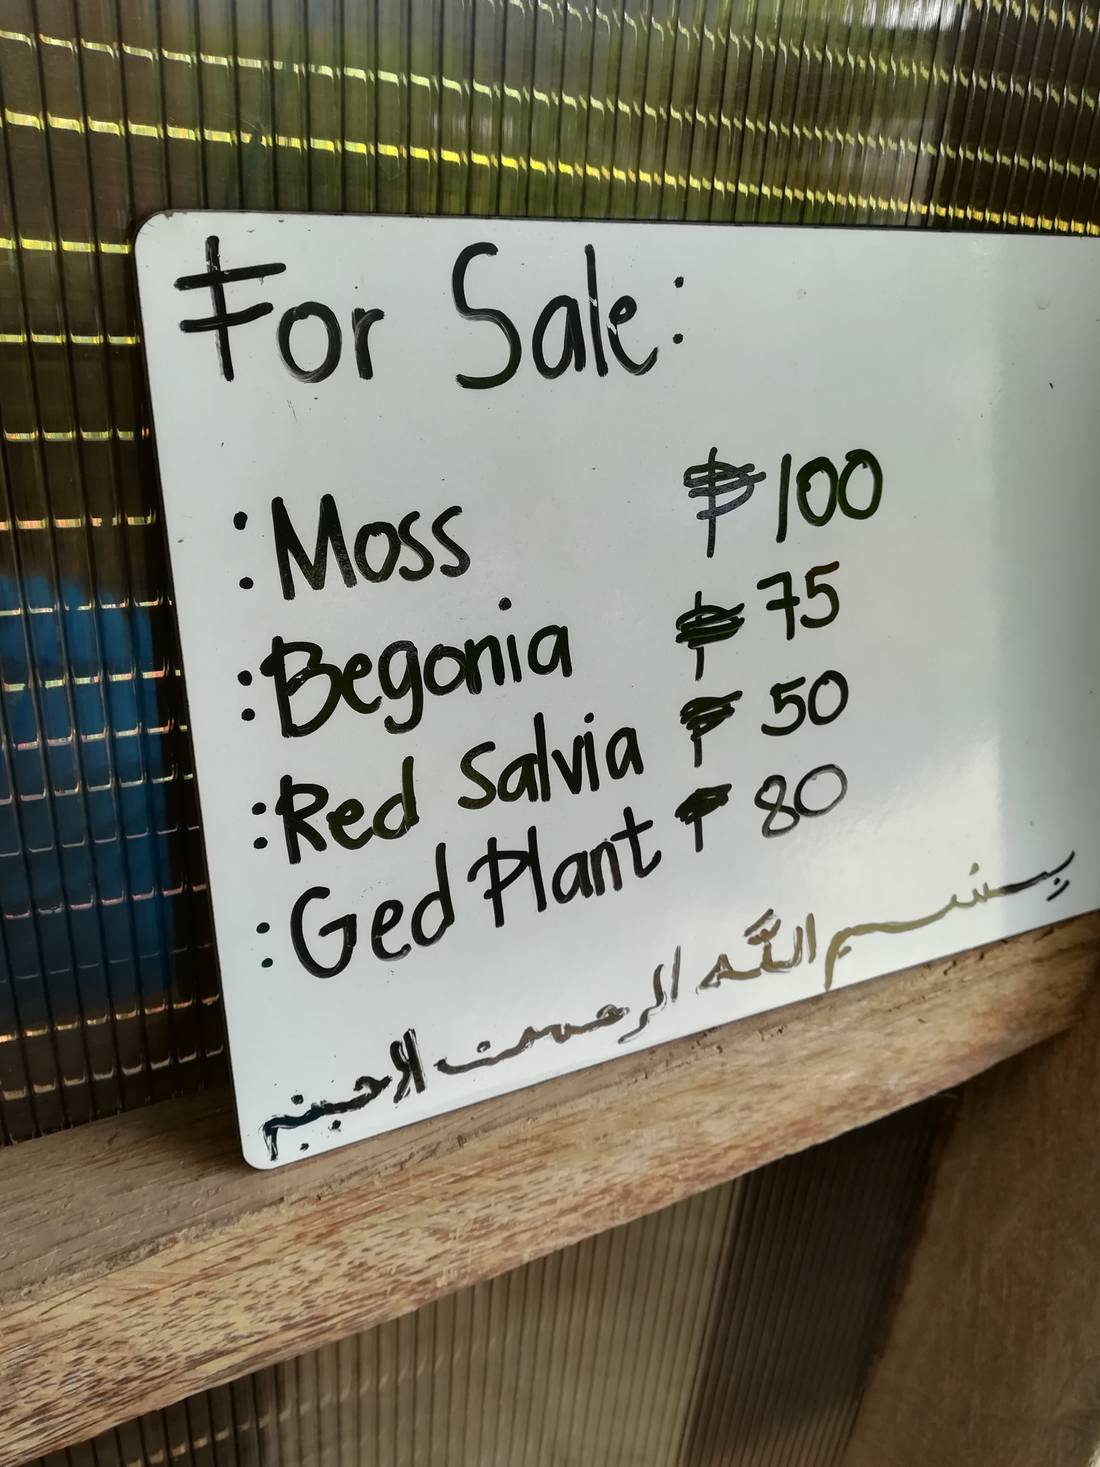 prices for the flowers